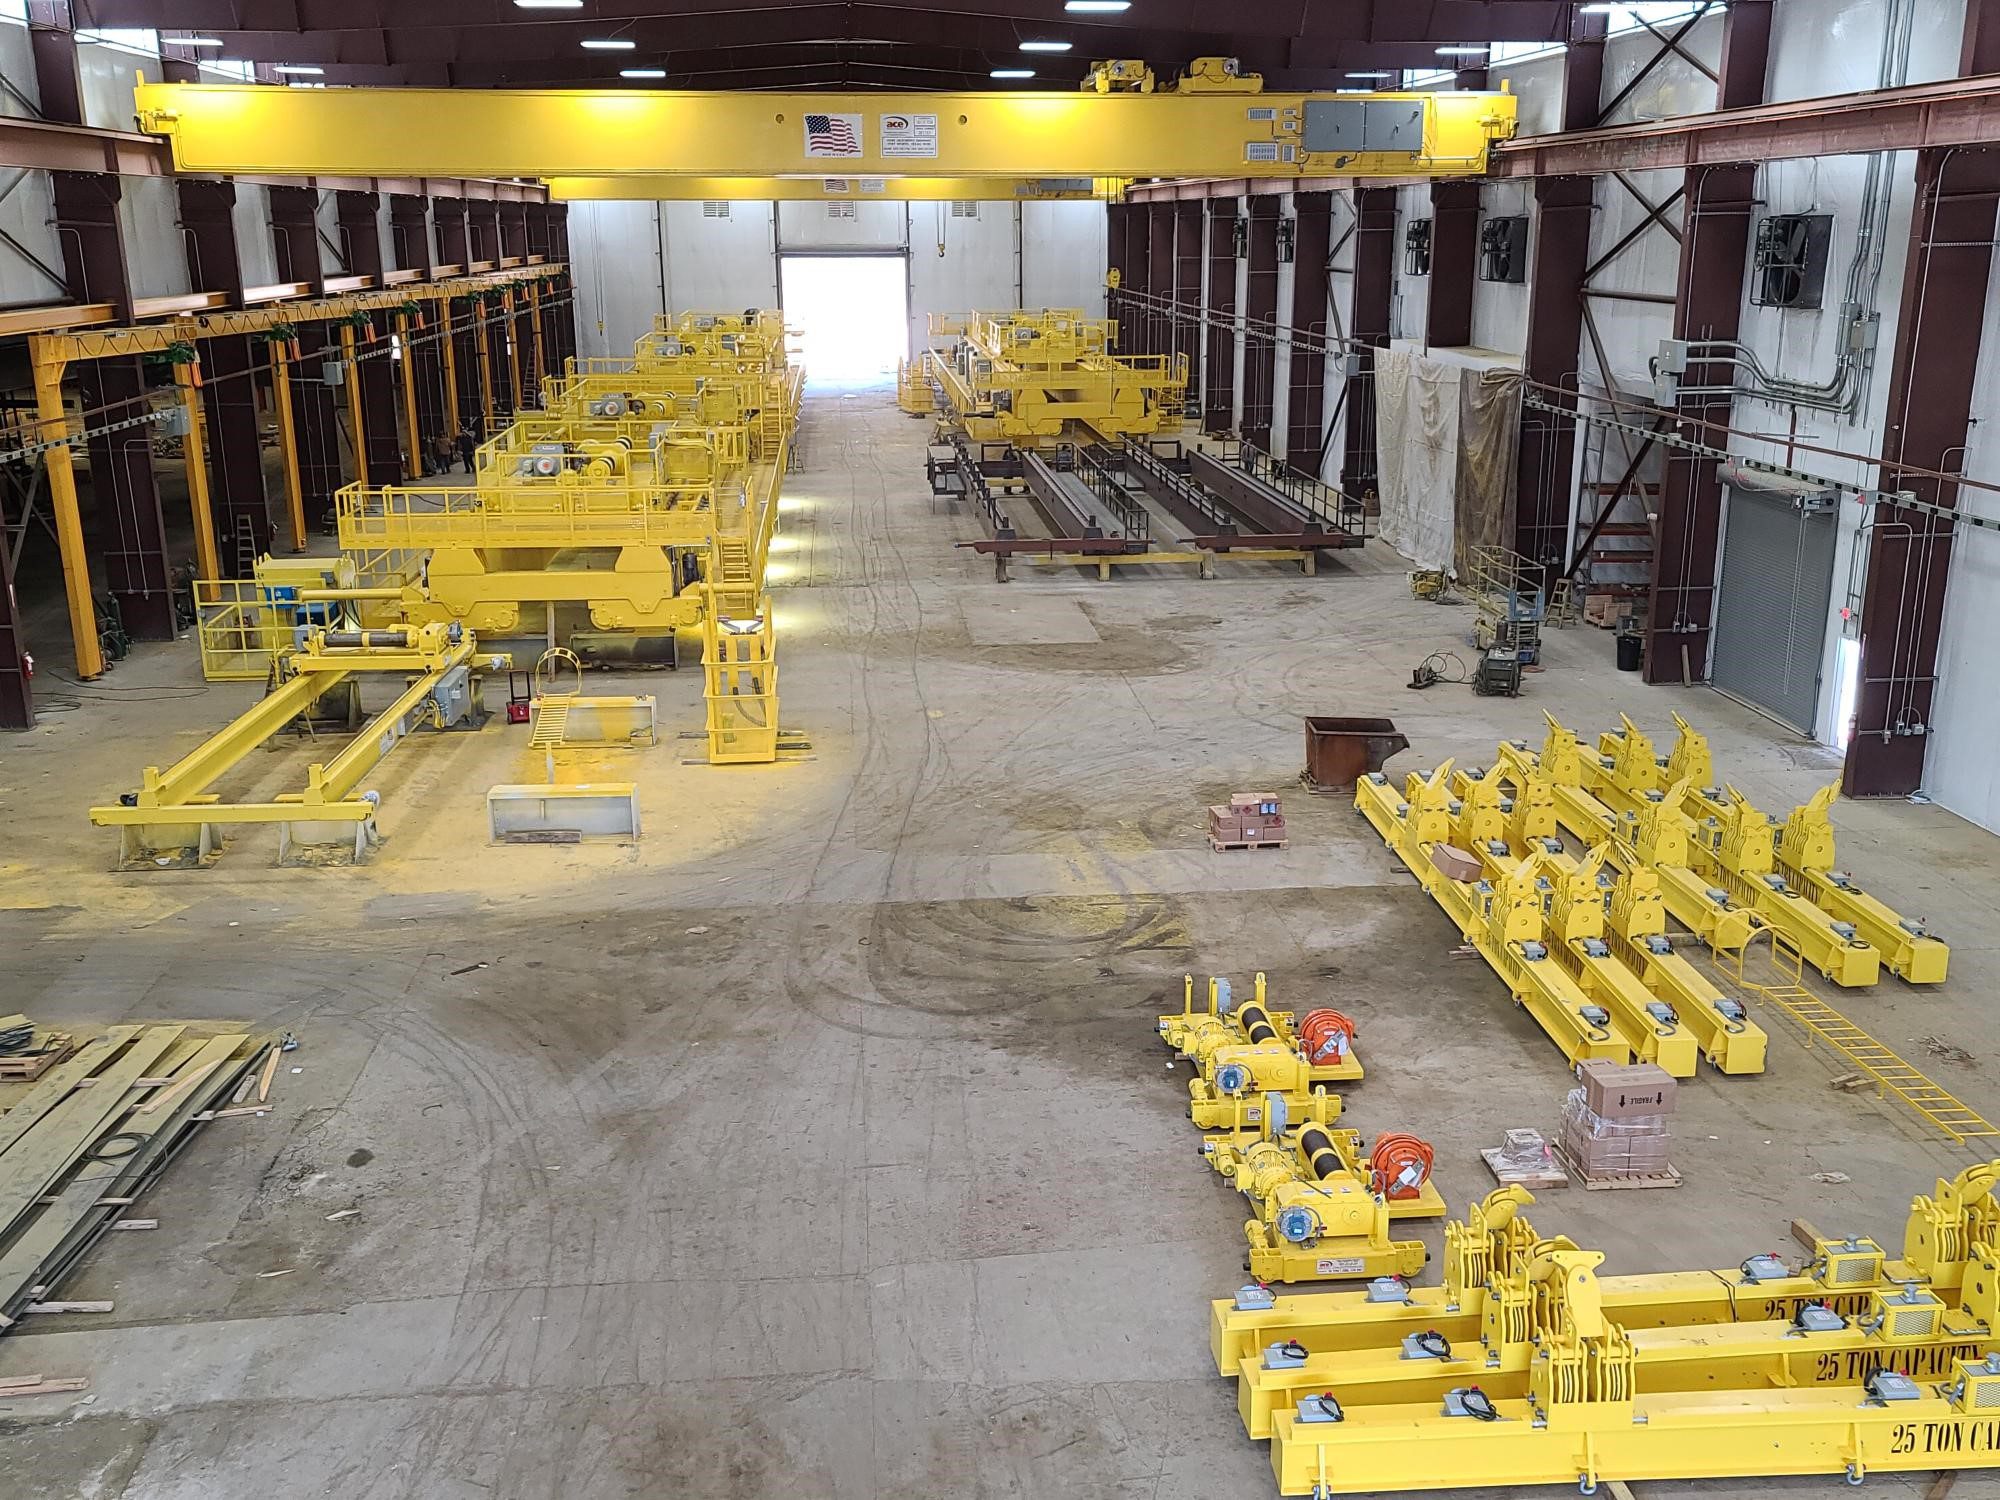 Overhead cranes and wire rope hoists at Ace World Companies Clinton, TN crane manufacturing facility